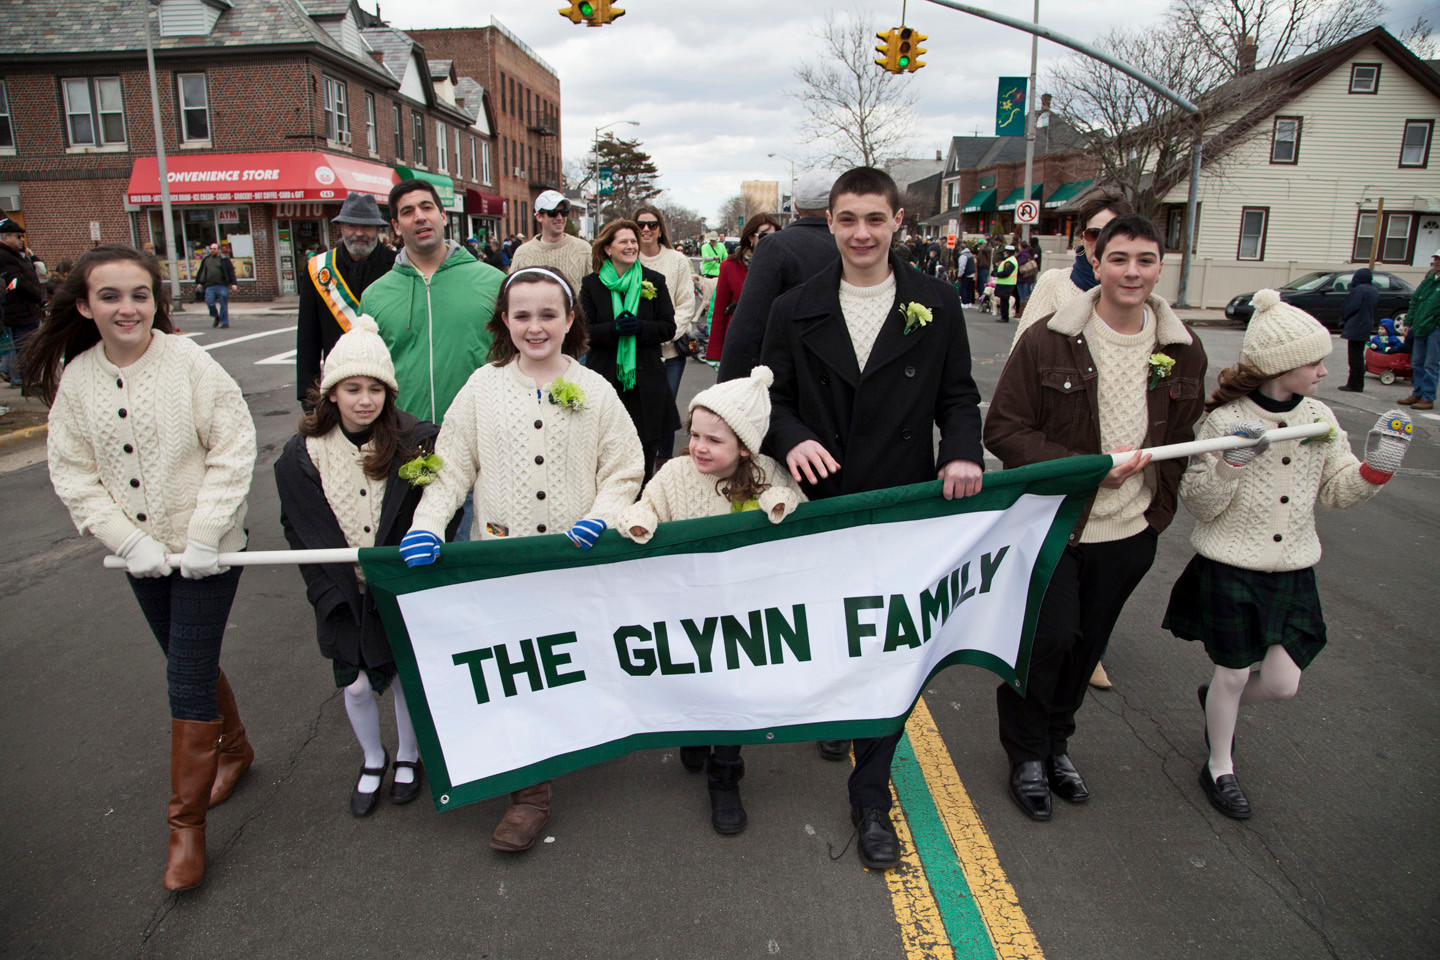 Grand Marshal Glynn’s family also marched in the parade. From left were Emily, Jennifer, Anna, Grace, John, Michael and Maddy Glynn.